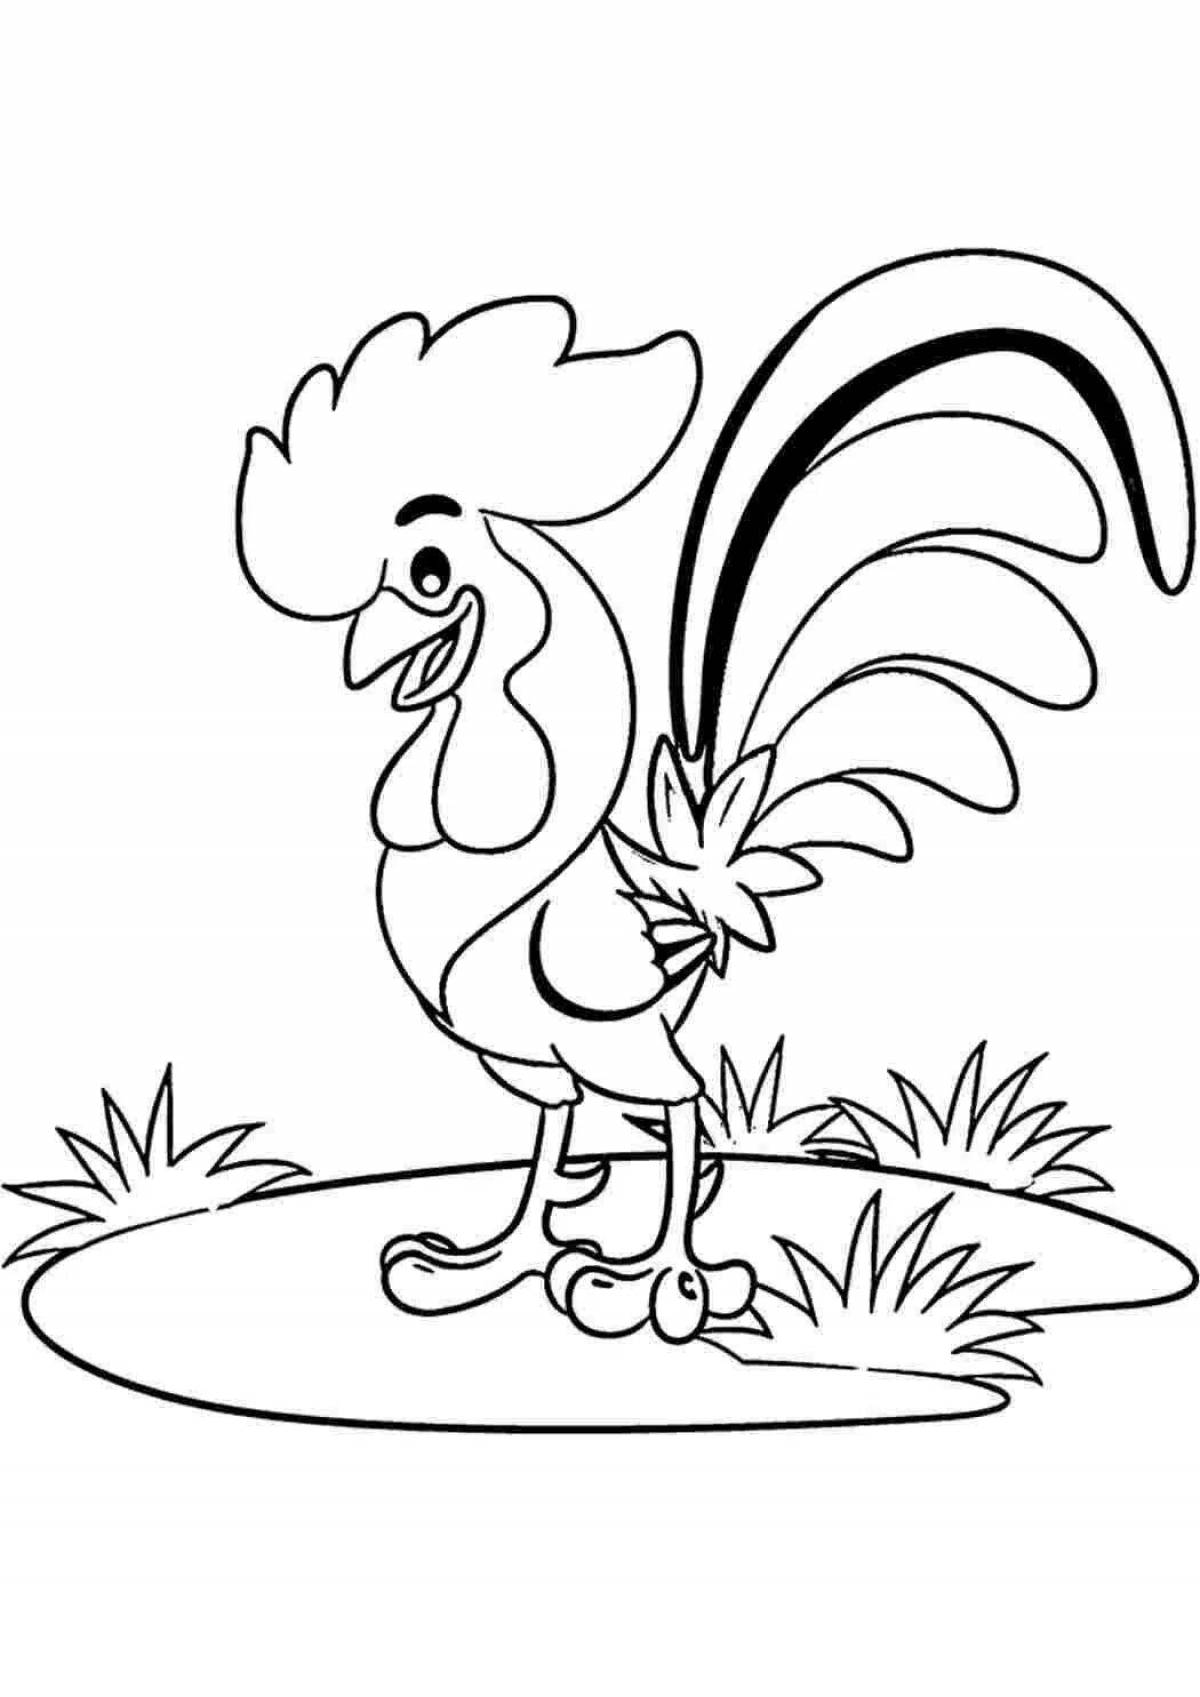 A funny rooster coloring book for 6-7 year olds